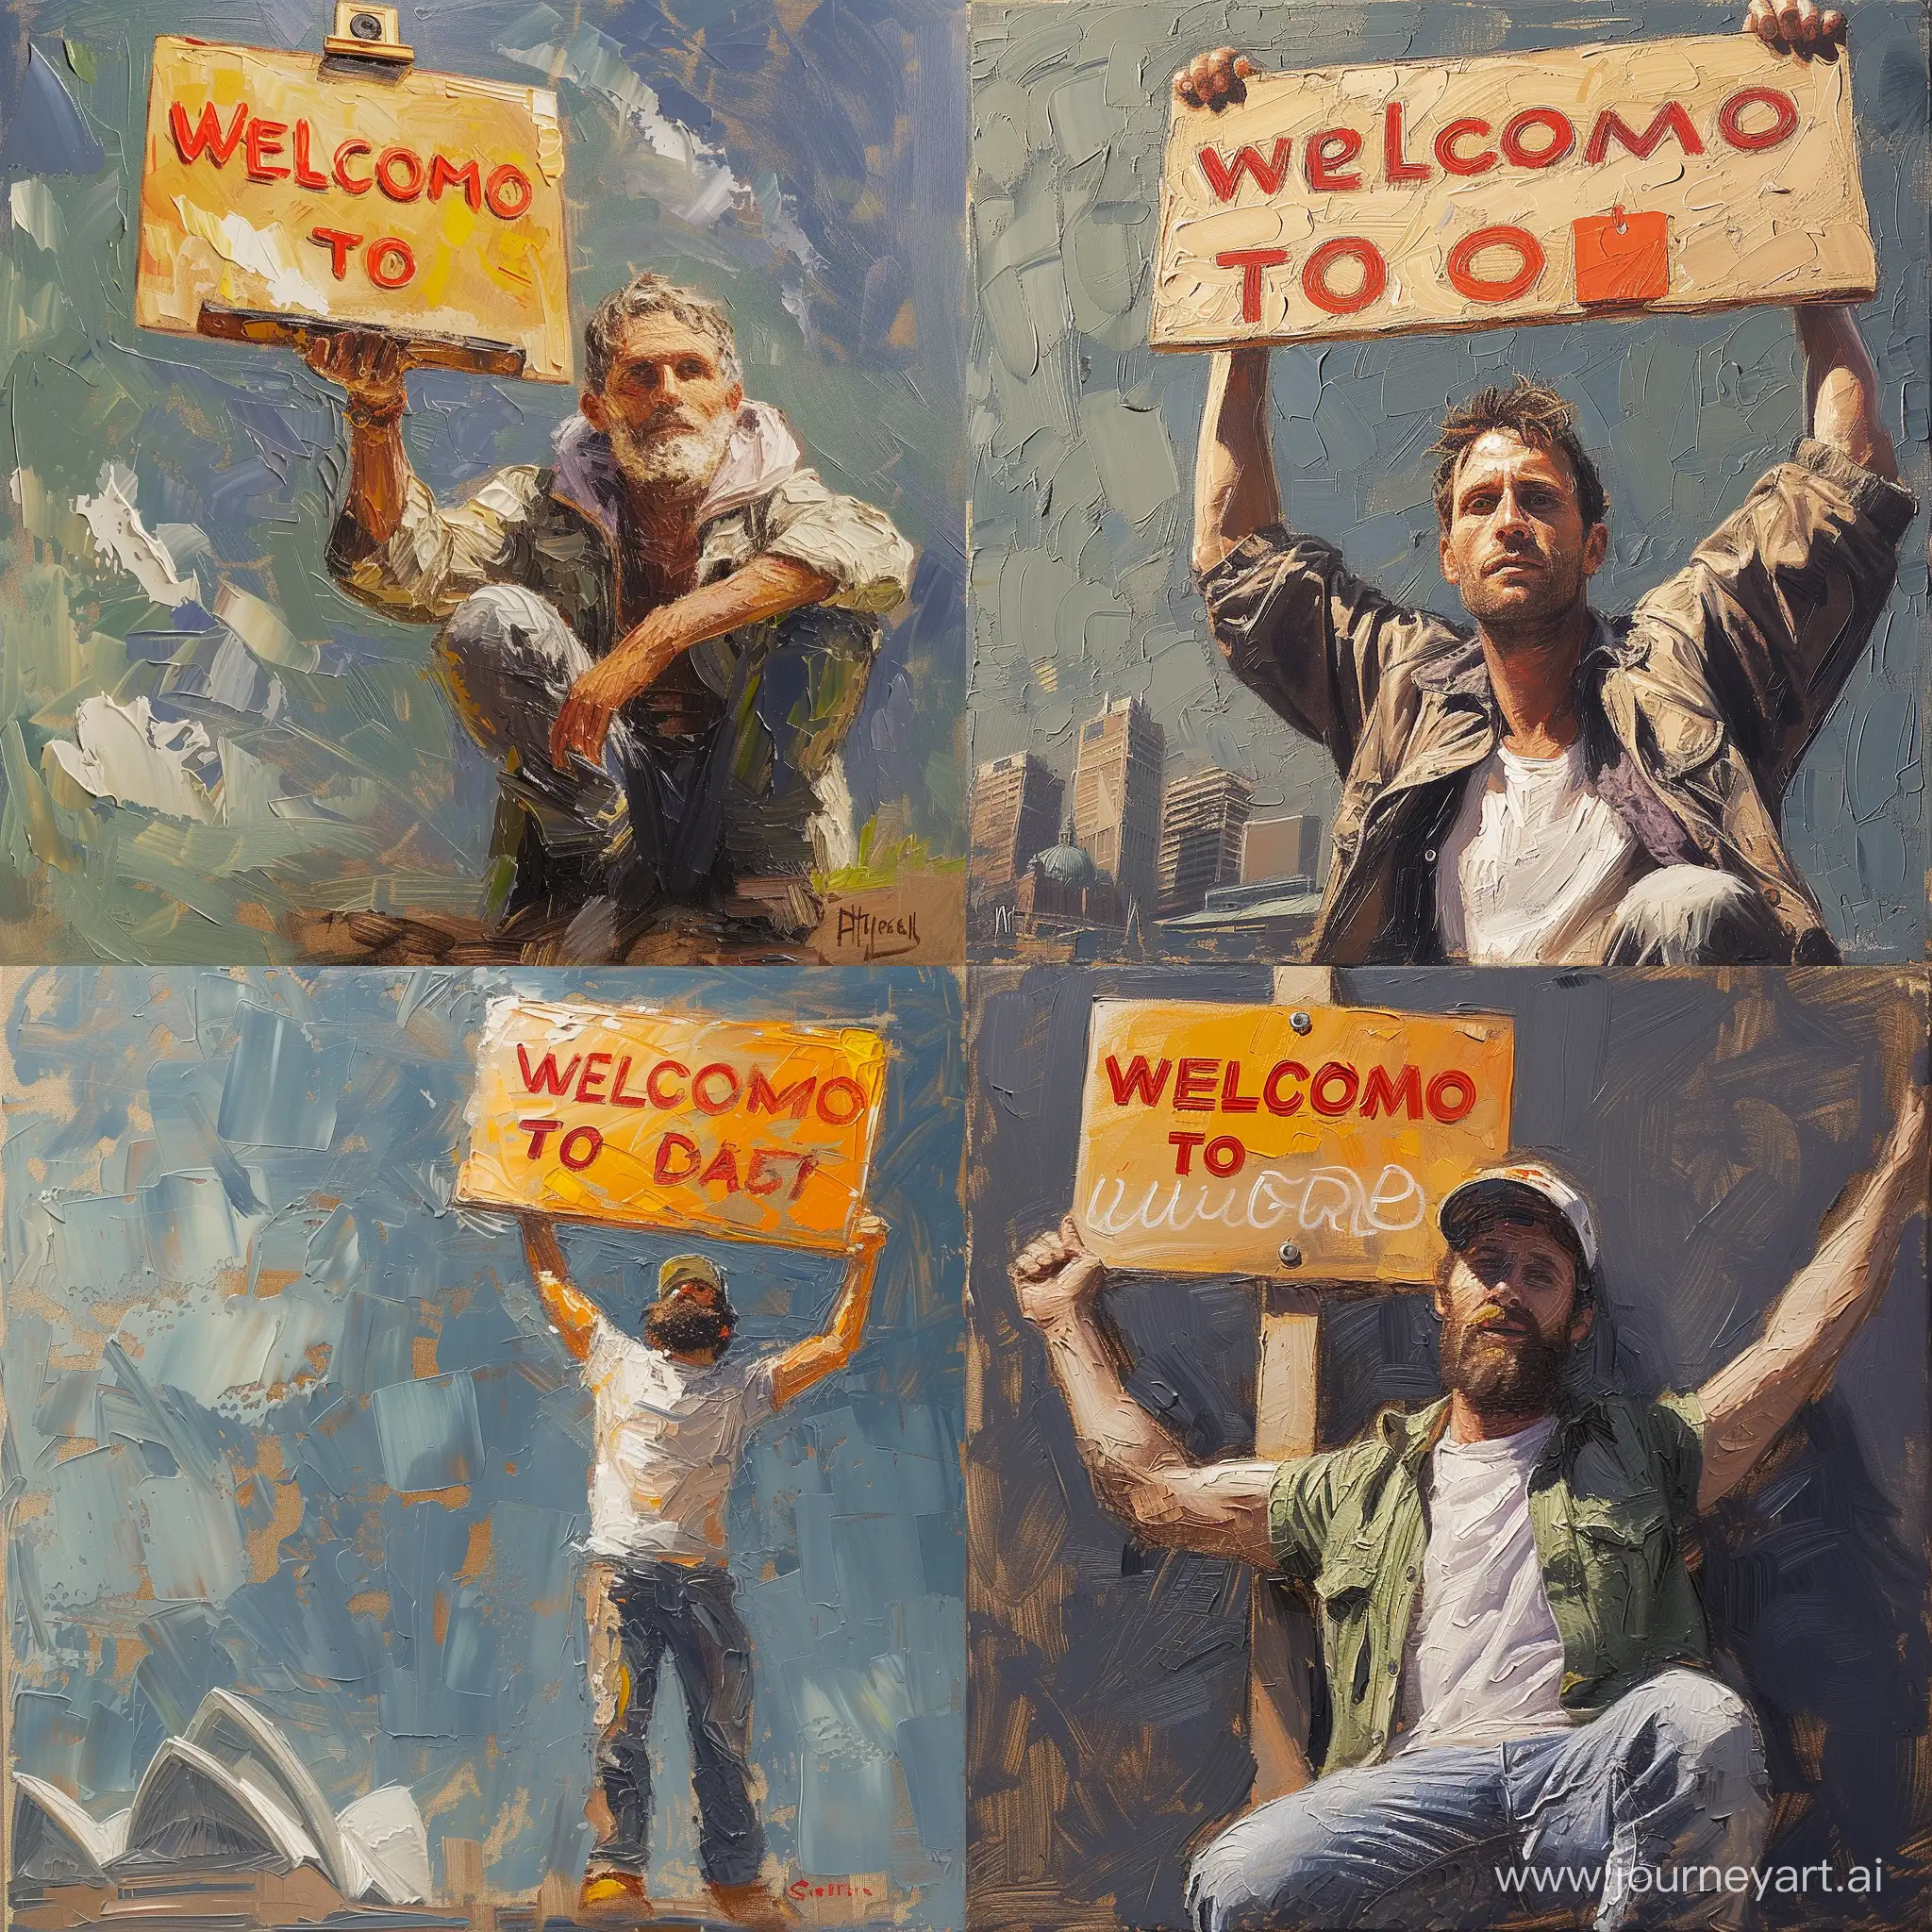 Sydney-Welcoming-Gesture-Captivating-Oil-Painting-of-a-Man-Holding-a-Welcome-to-Sydney-Sign